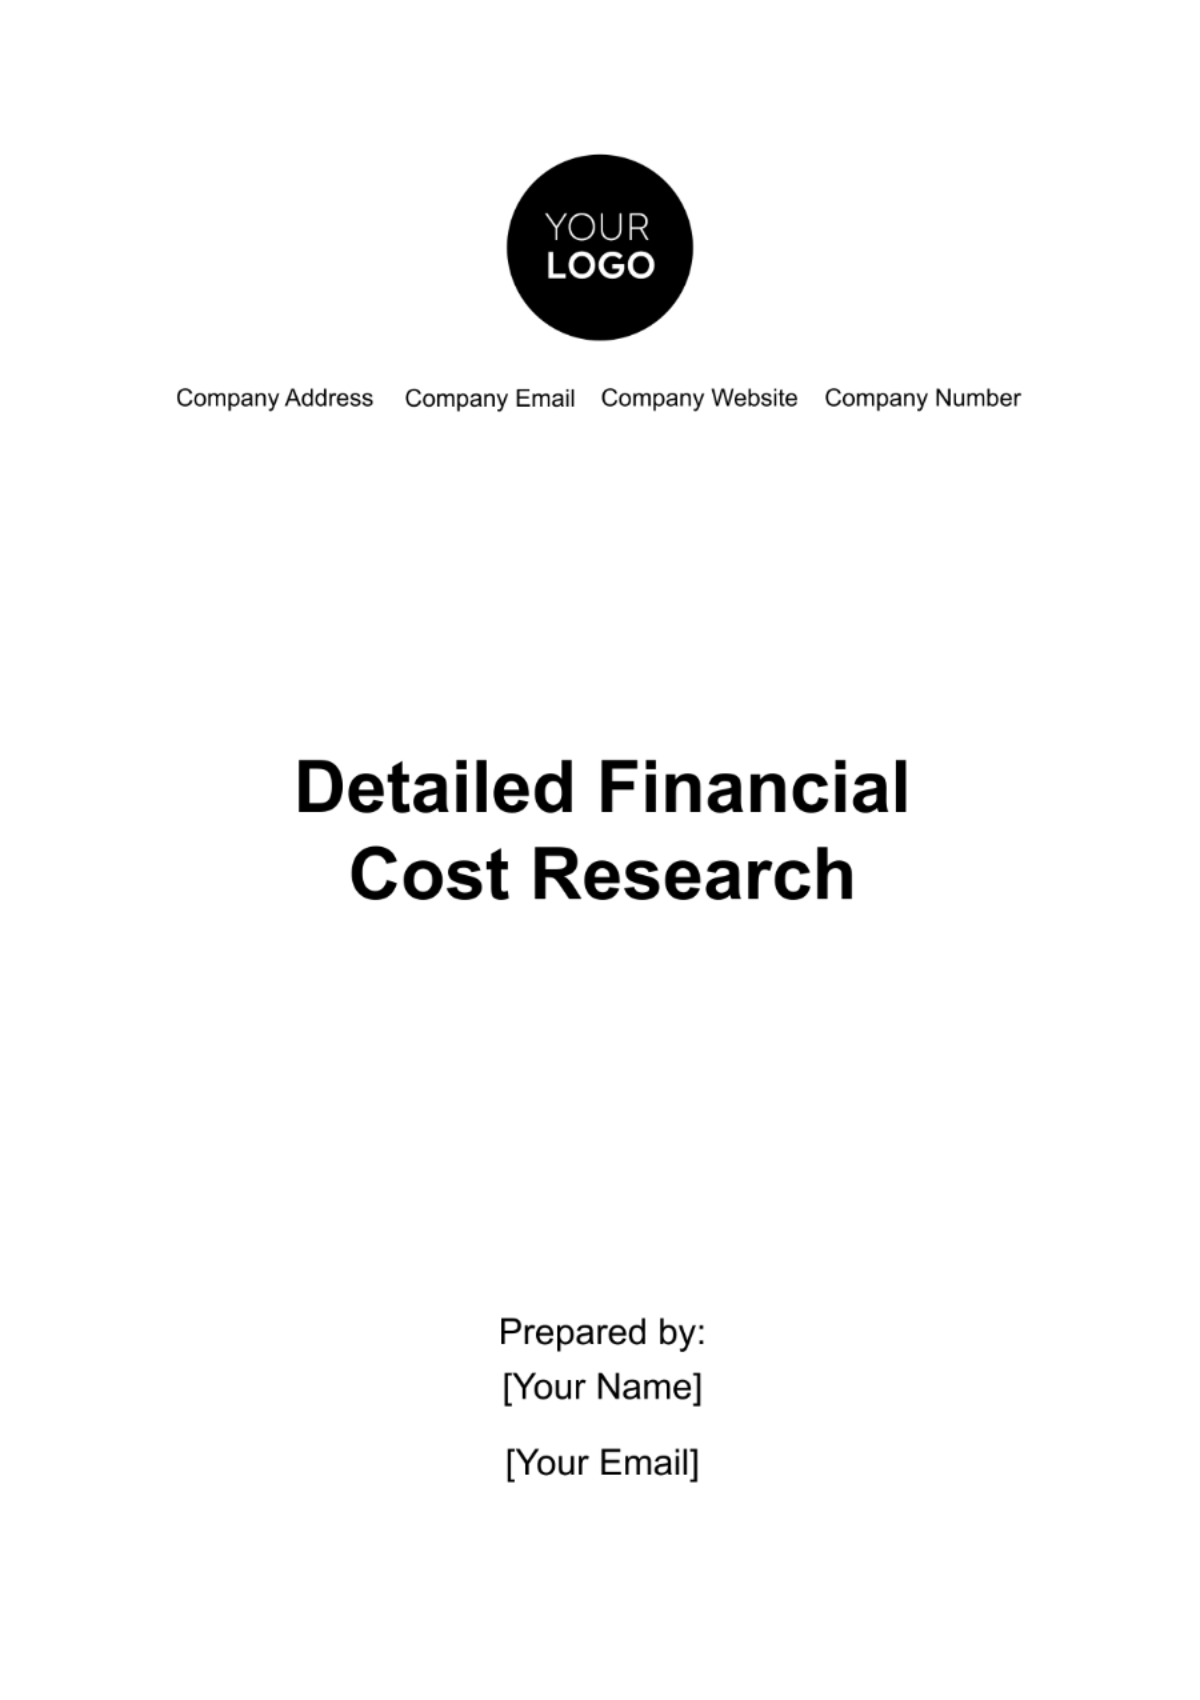 Detailed Financial Cost Research Template